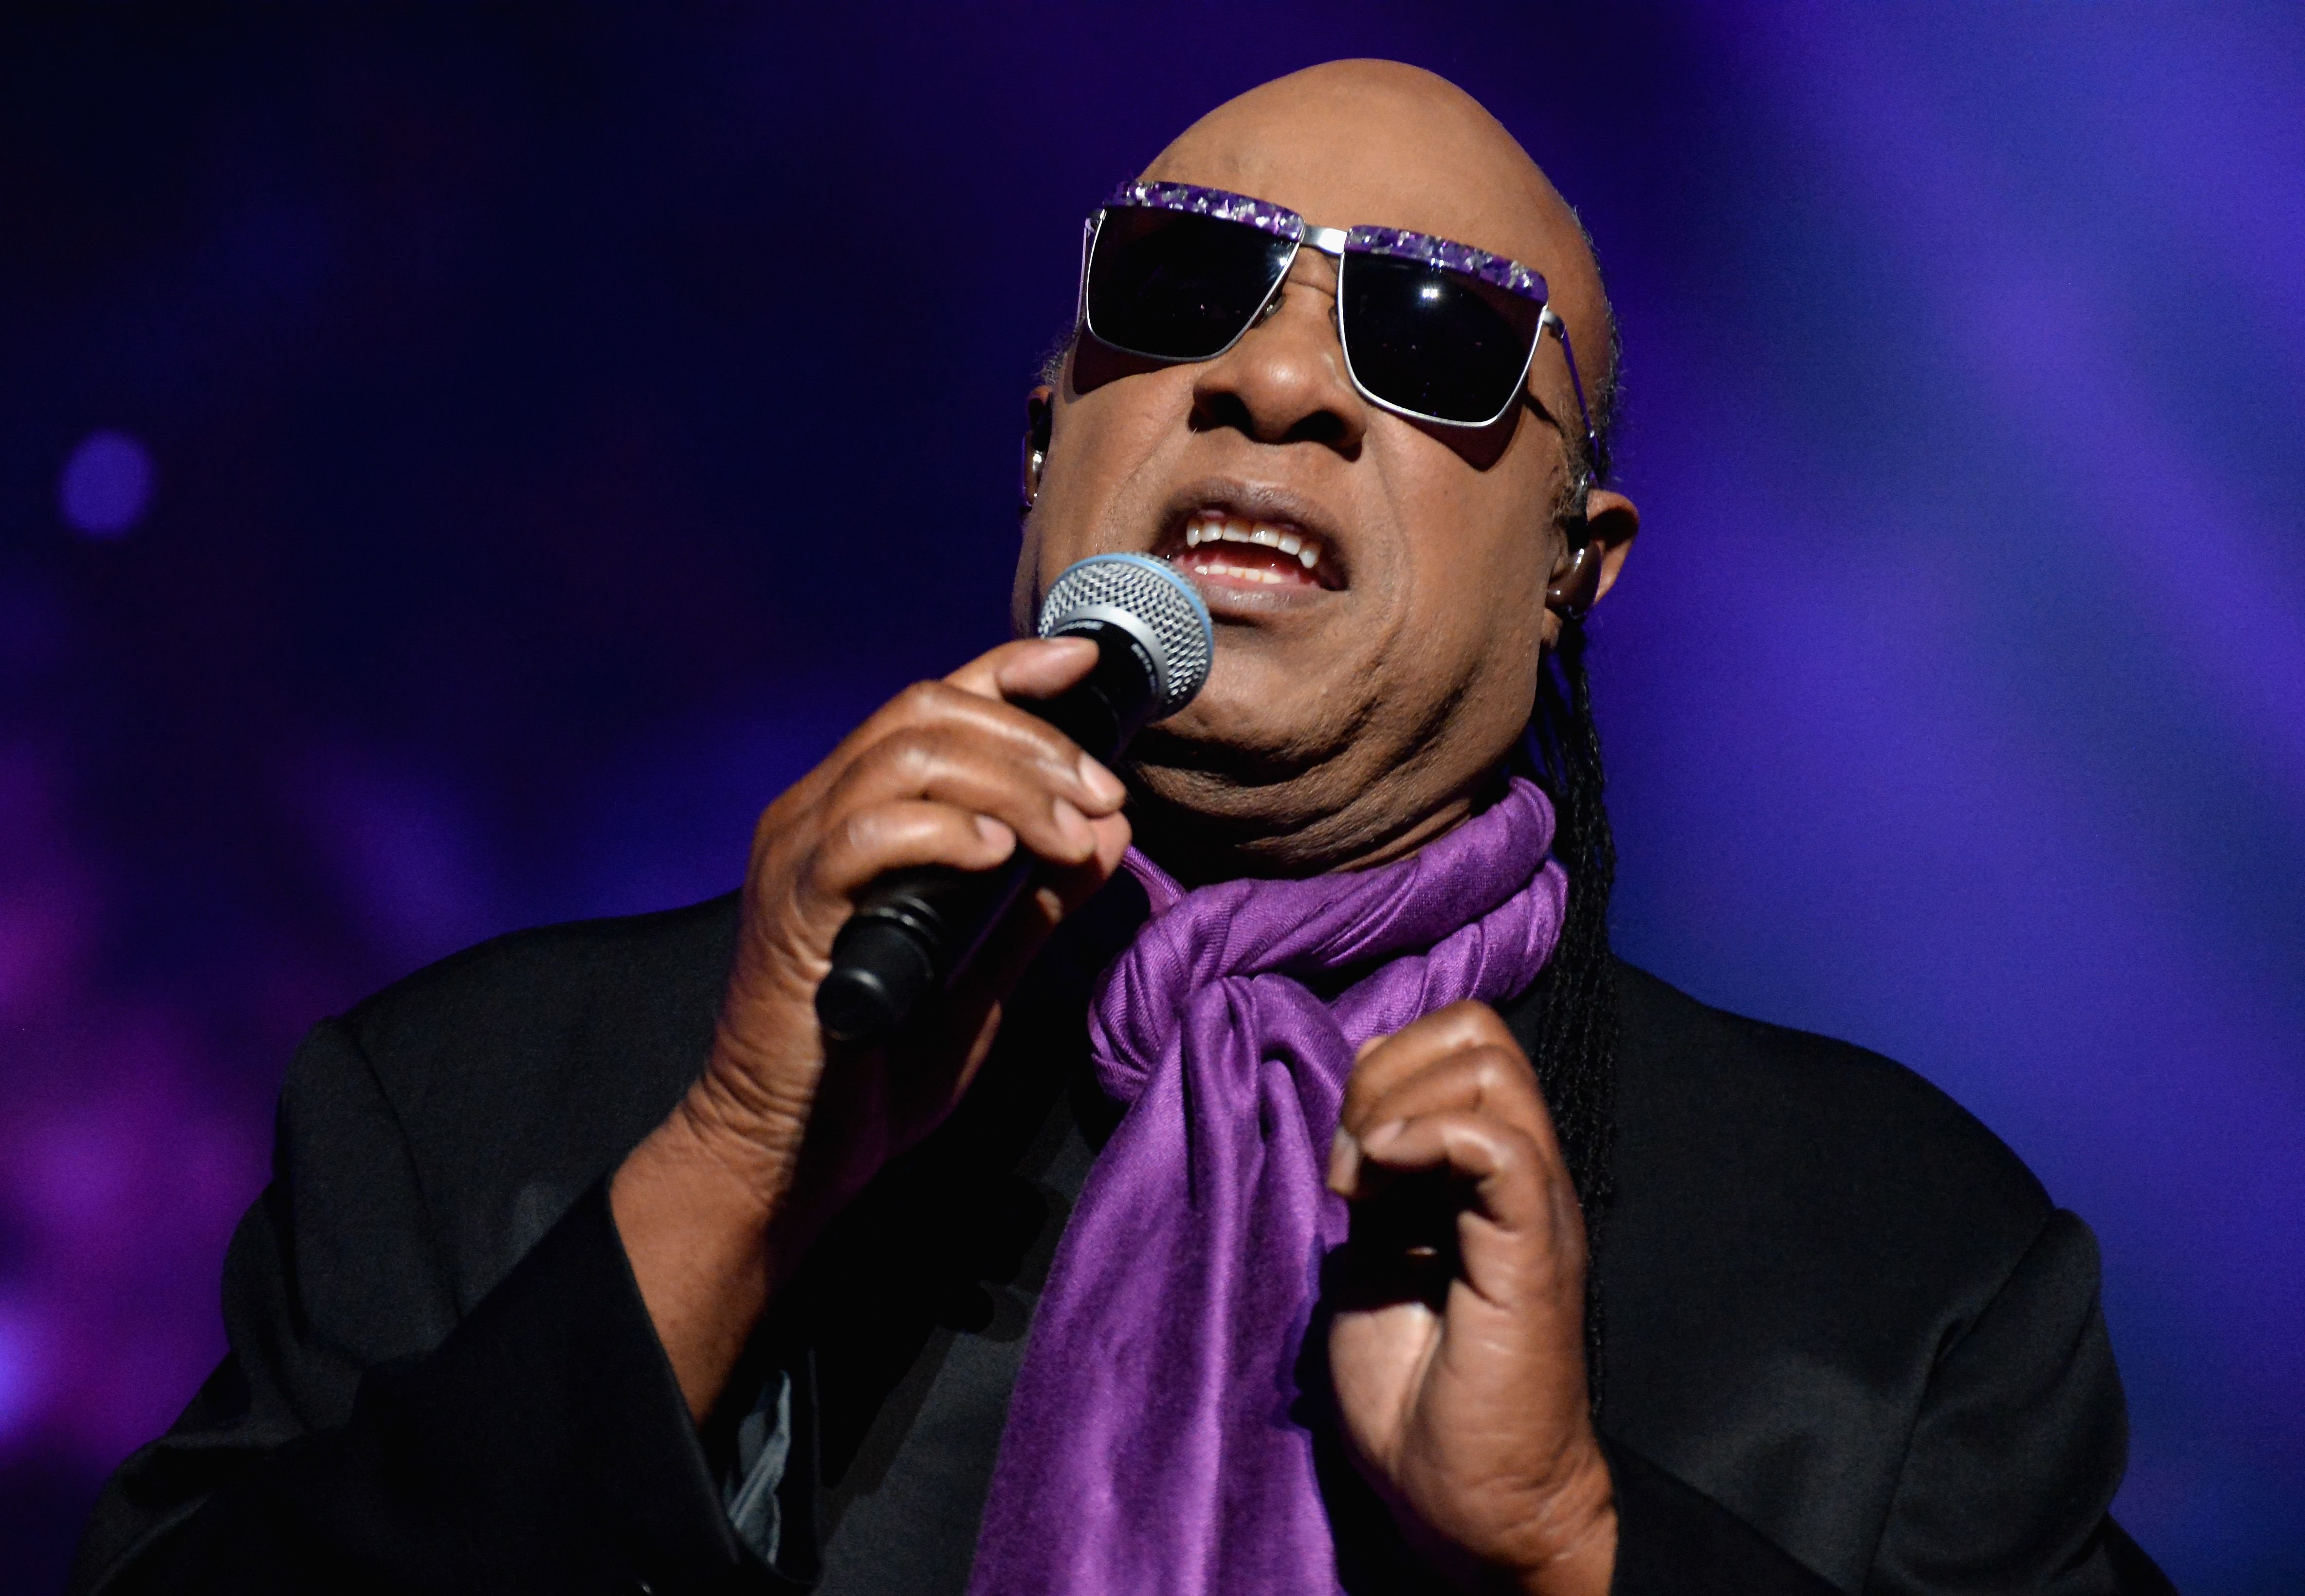 Stevie Wonder sings onstage during the 2016 Billboard Music Awards at T-Mobile Arena on May 22, 2016 in Las Vegas, Nevada. | Source: Getty Images